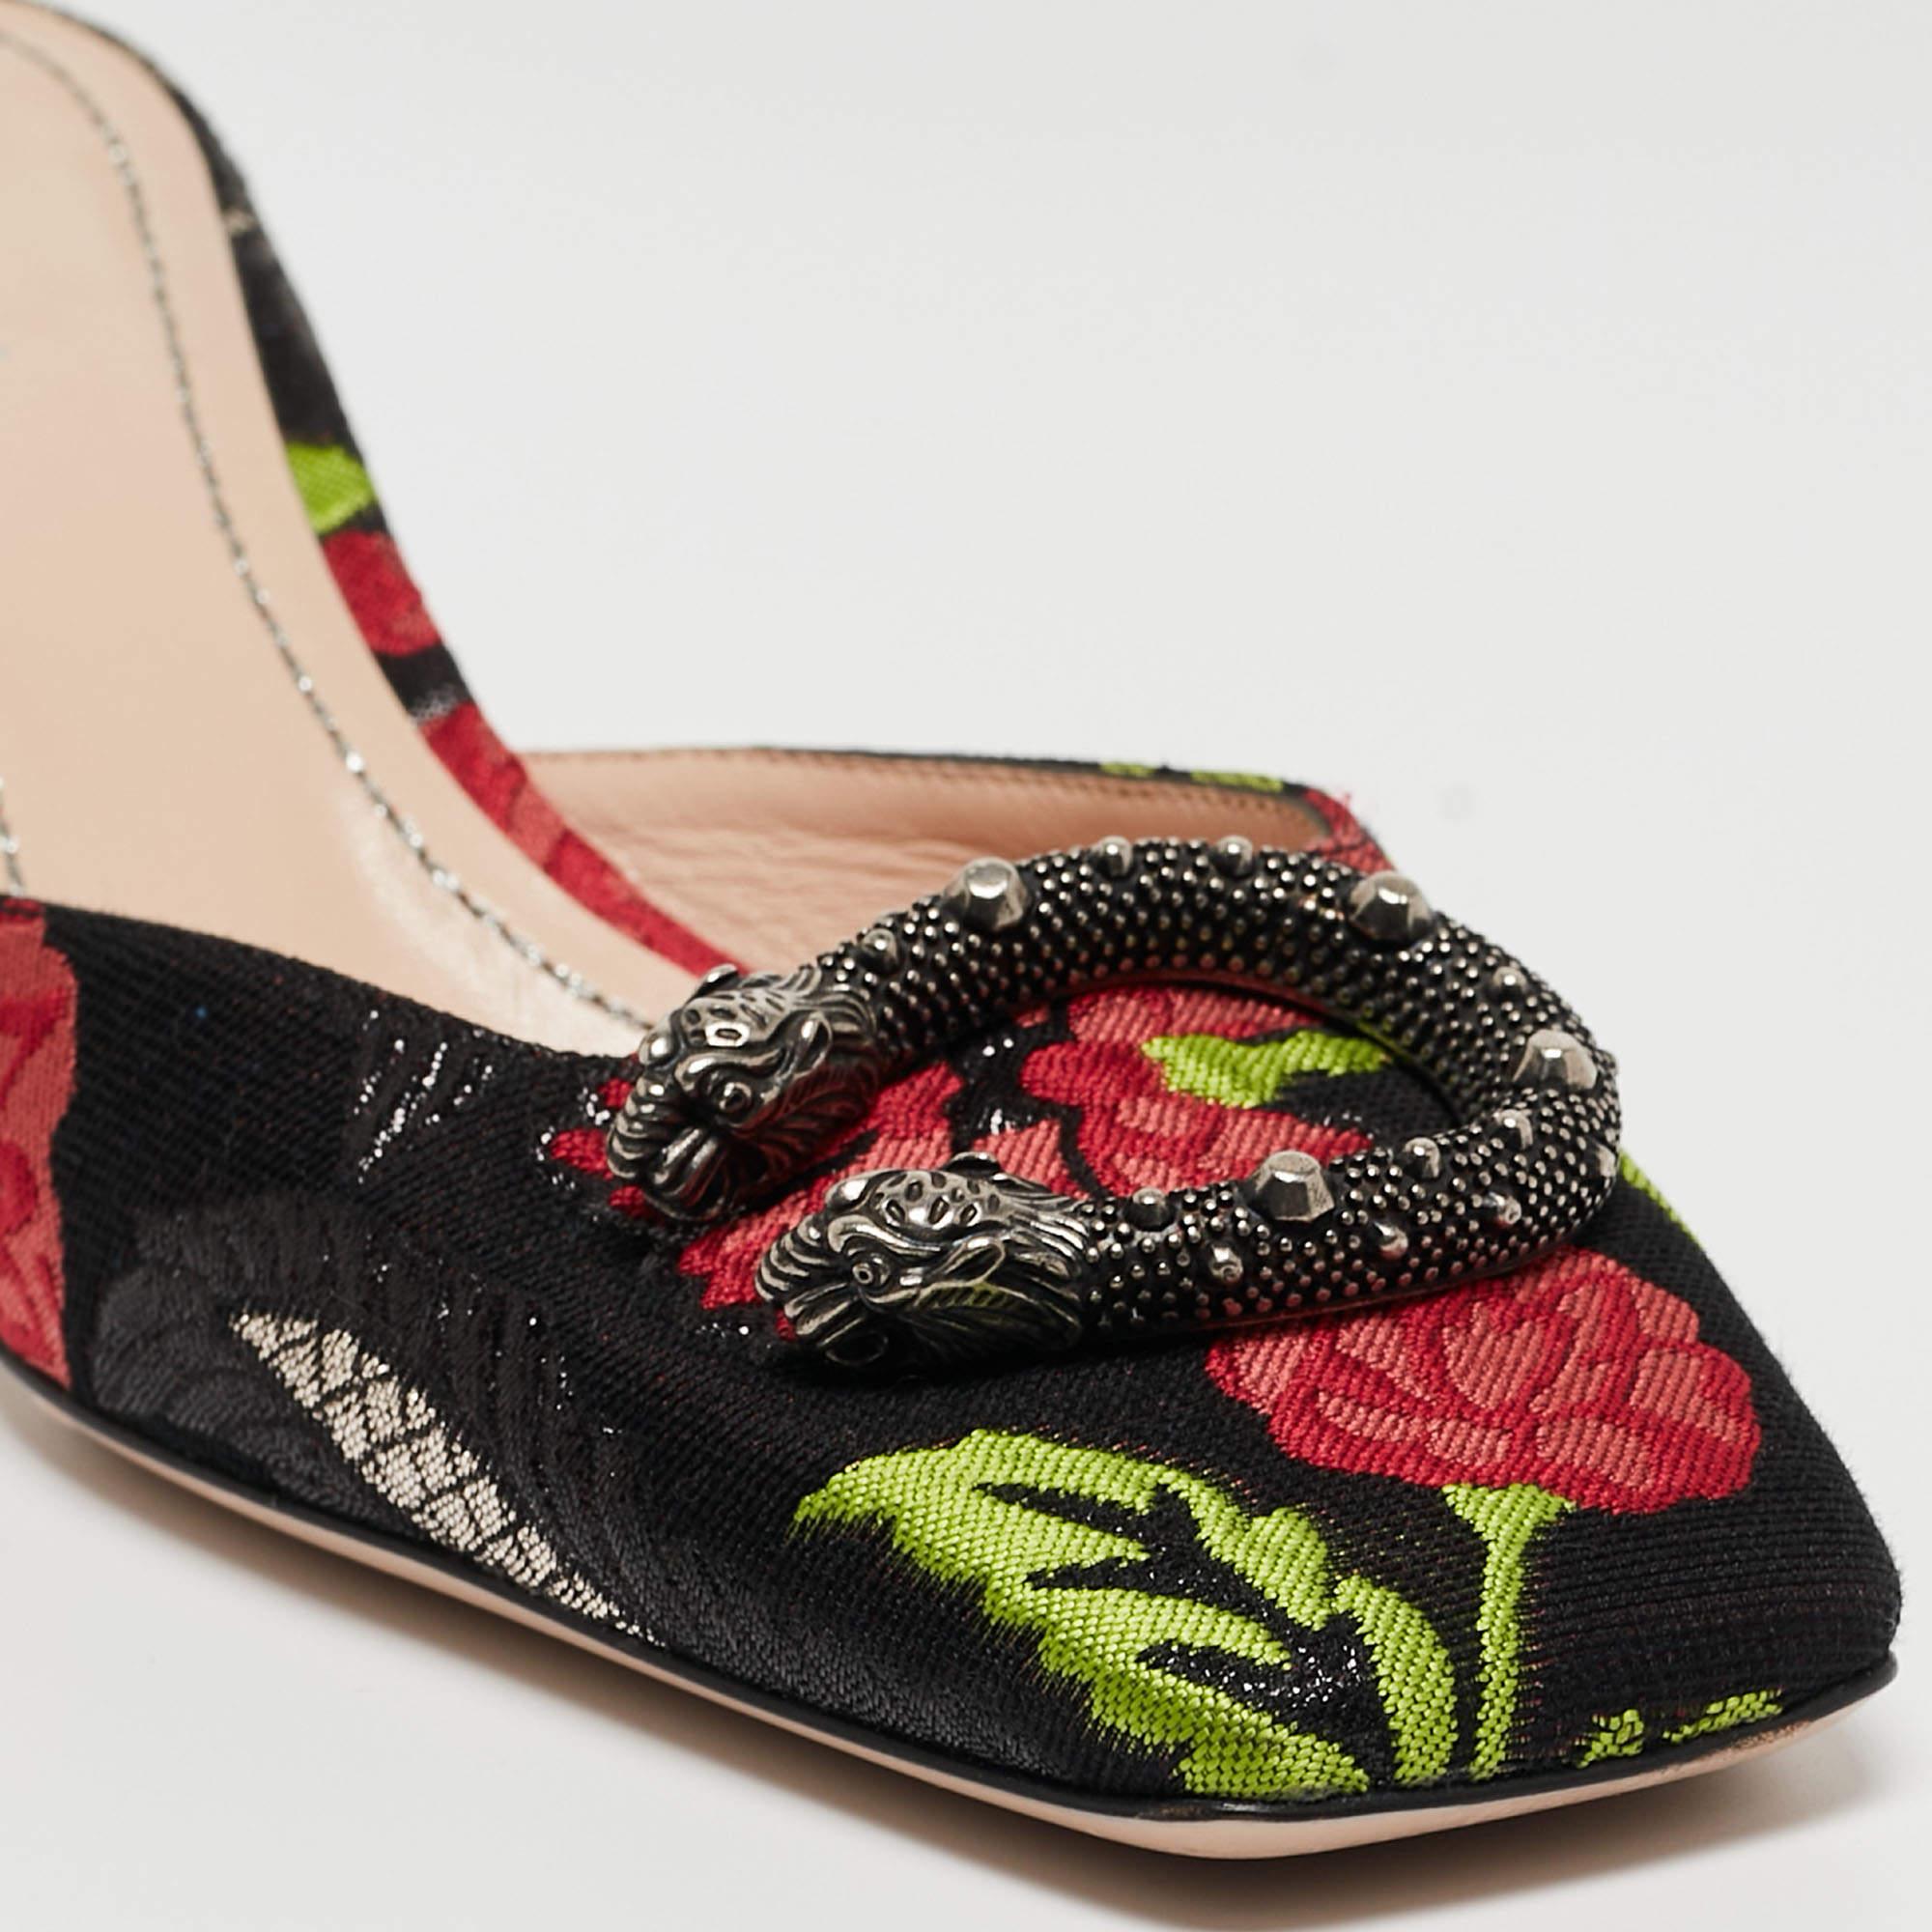 Gucci Multicolor Floral Brocade Fabric Dionysus Square Toe Slip On Mules Size 38 For Sale 4